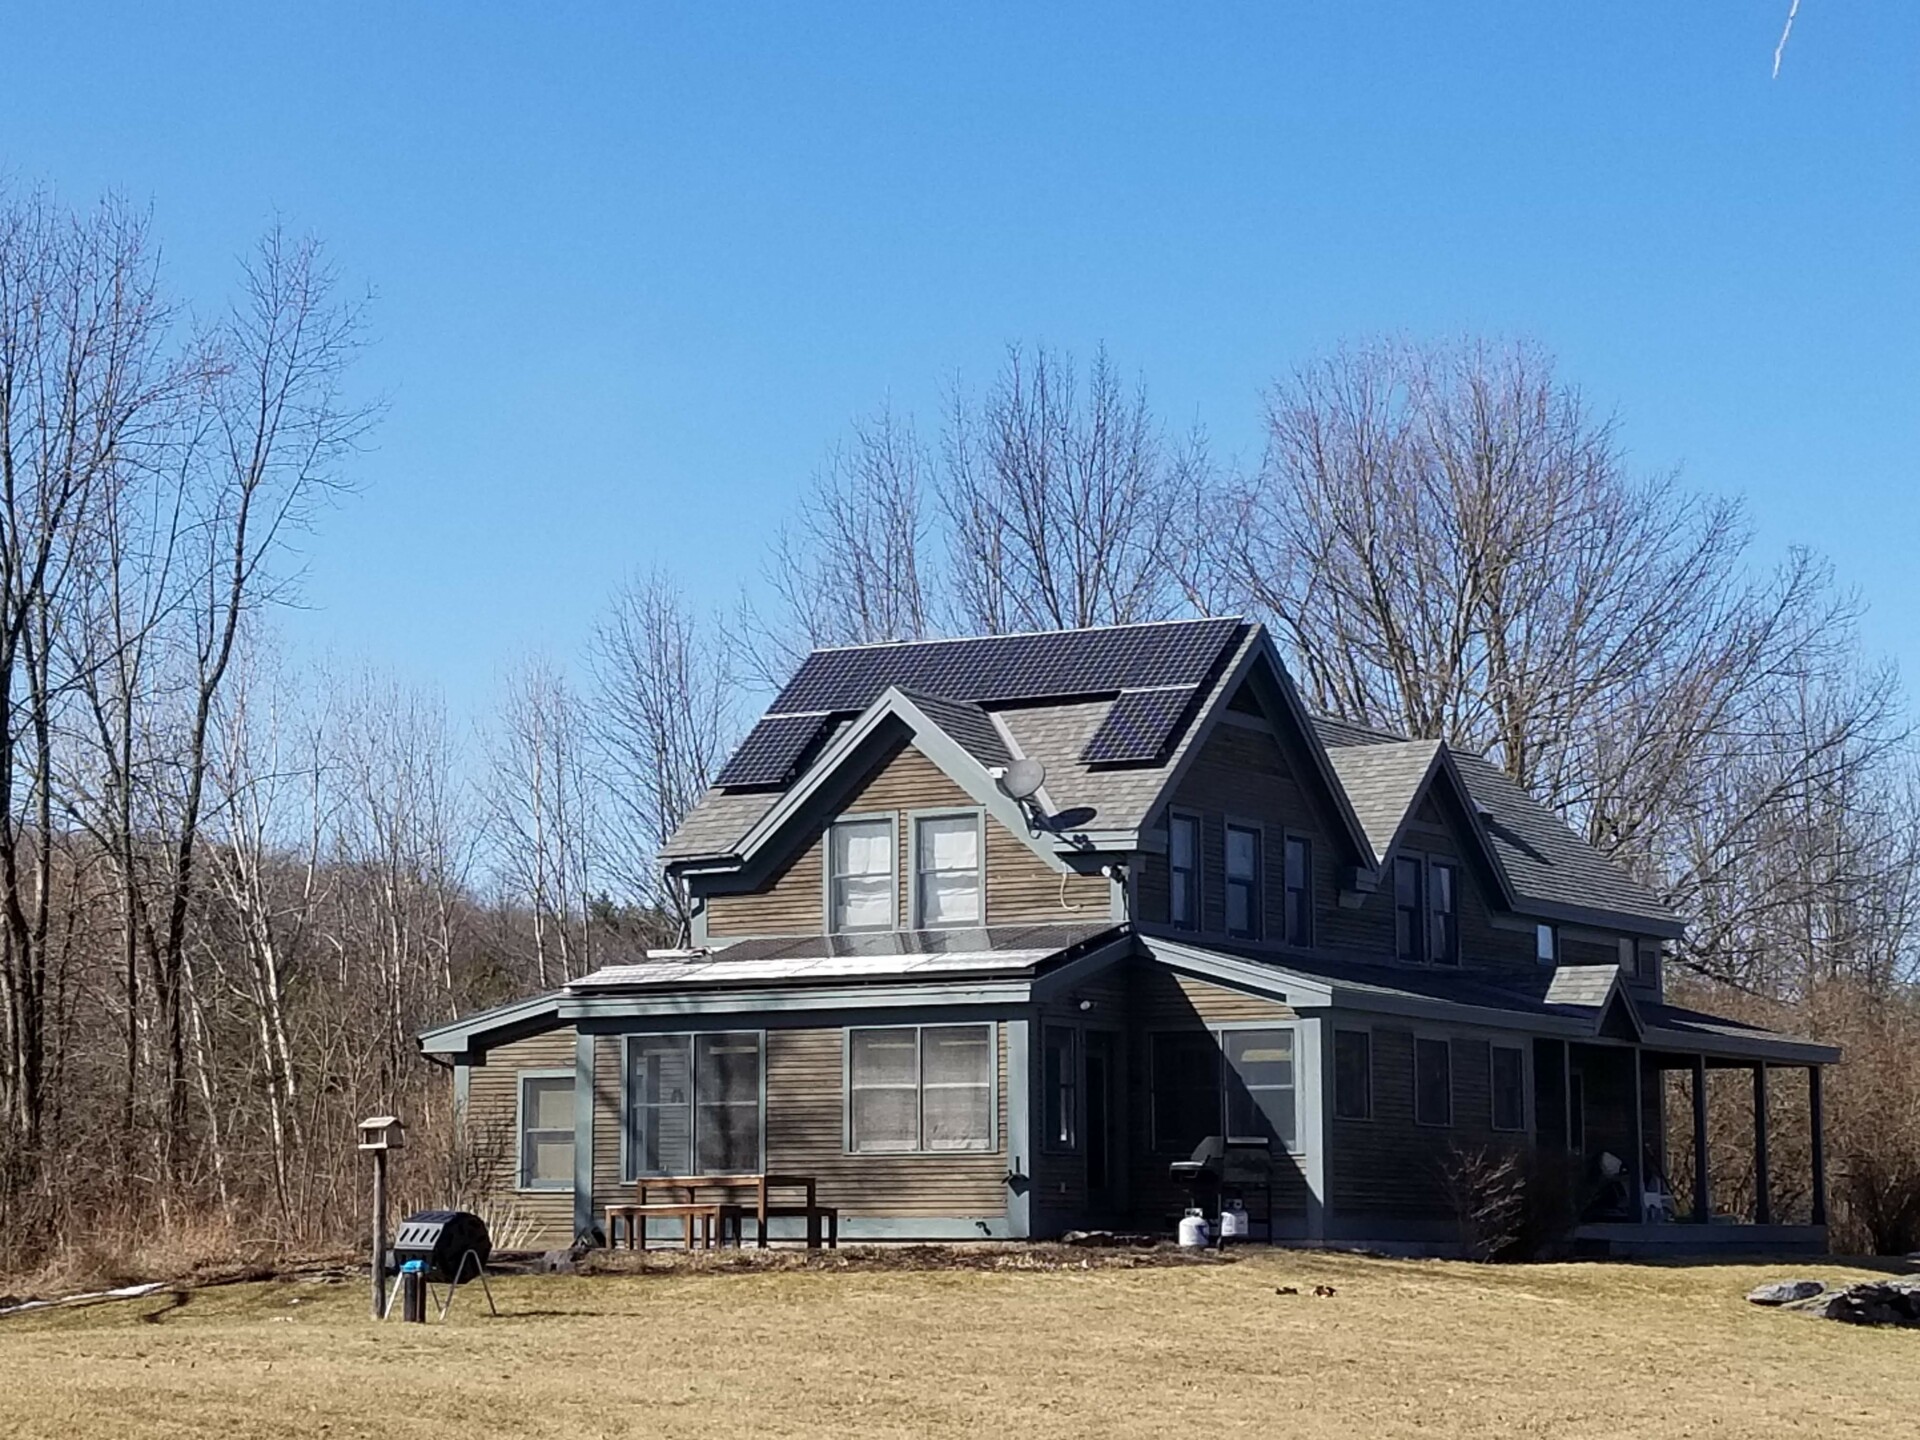 Large PV Solar Panels line the roof of a home that was recently the location of a efficiency project in Cornwall, VT.